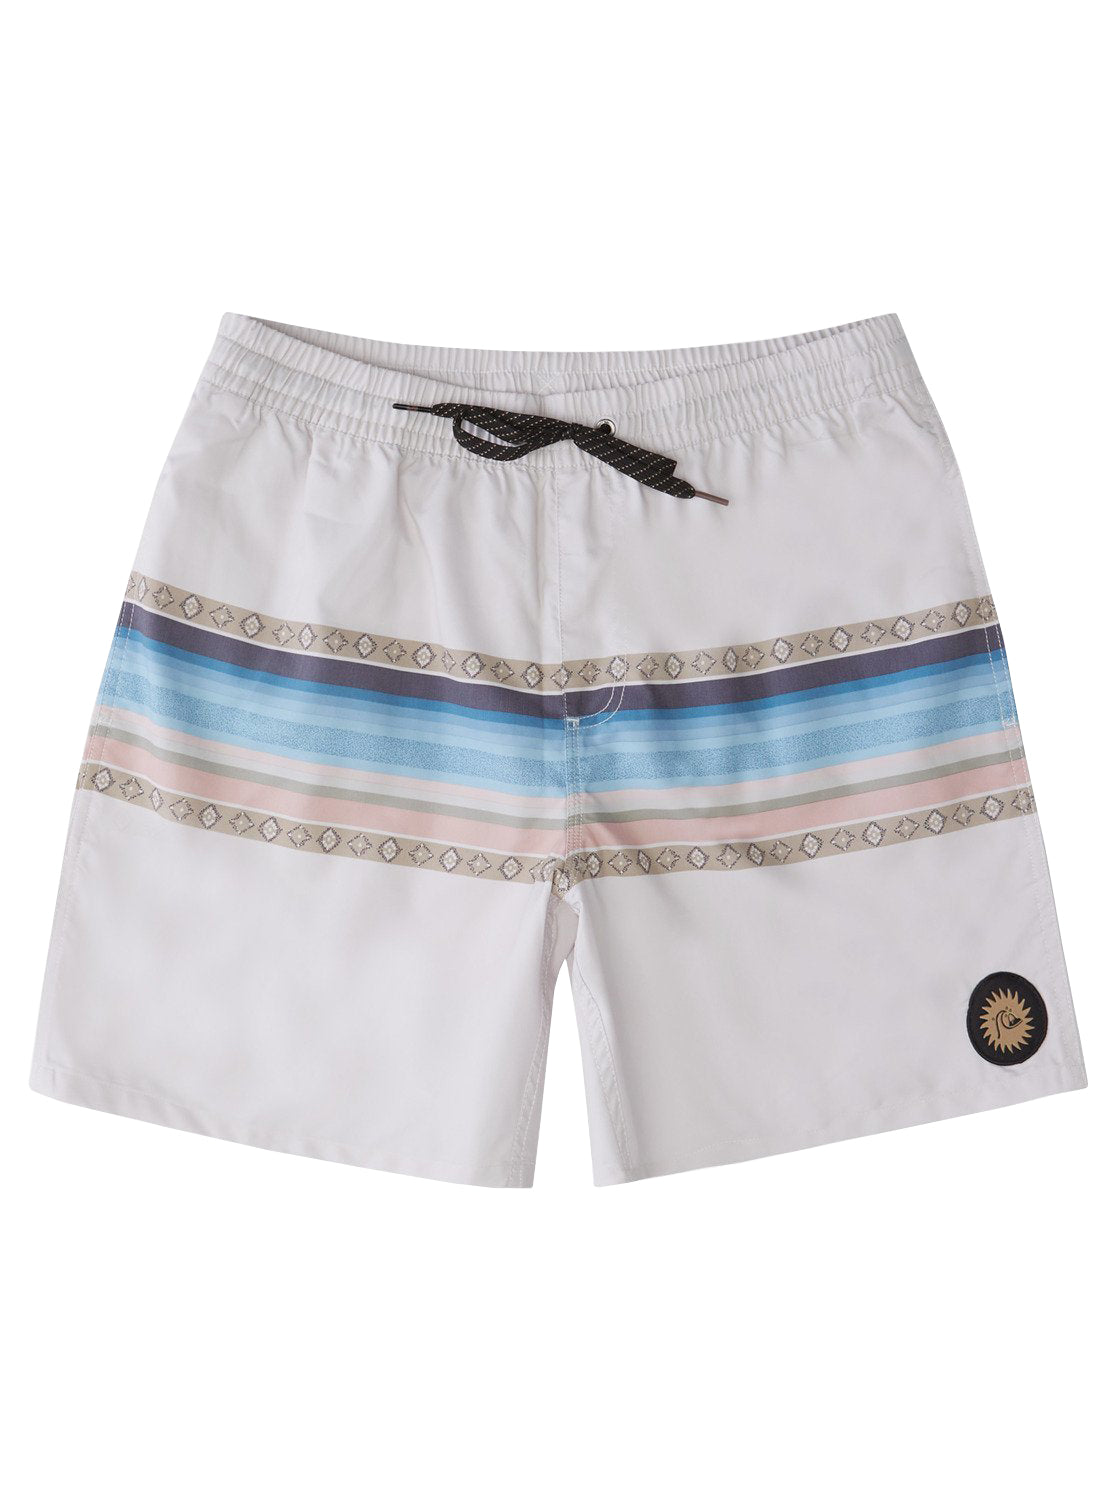 Quiksilver Sun Faded 17 Volley WCL6 L